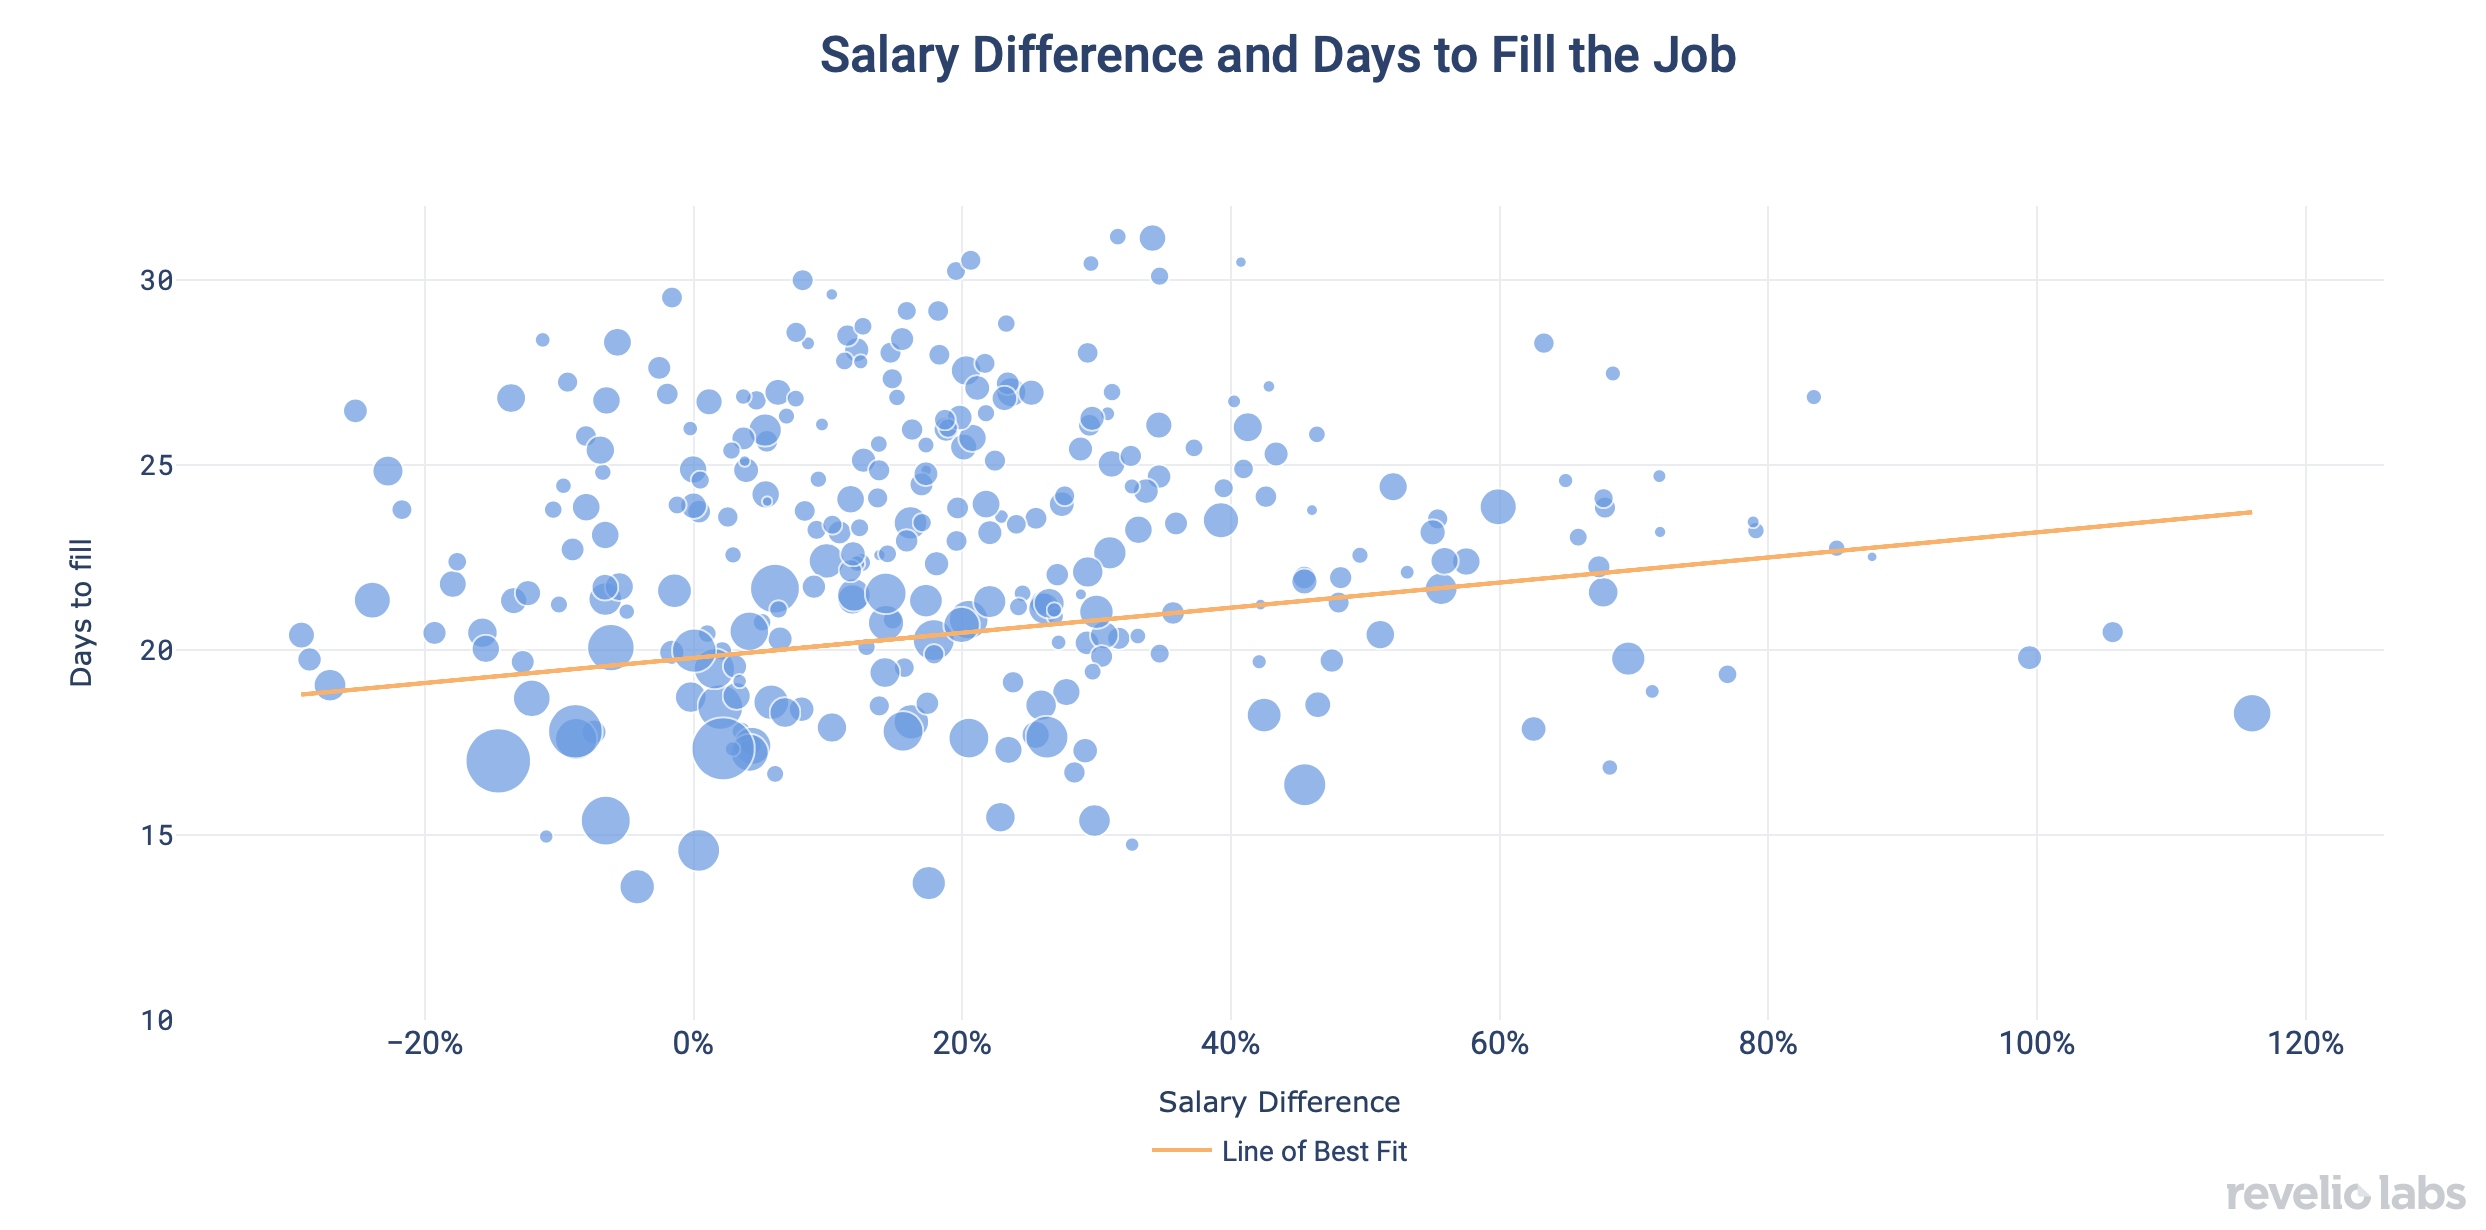 Salary Difference and Days to Fill the Job